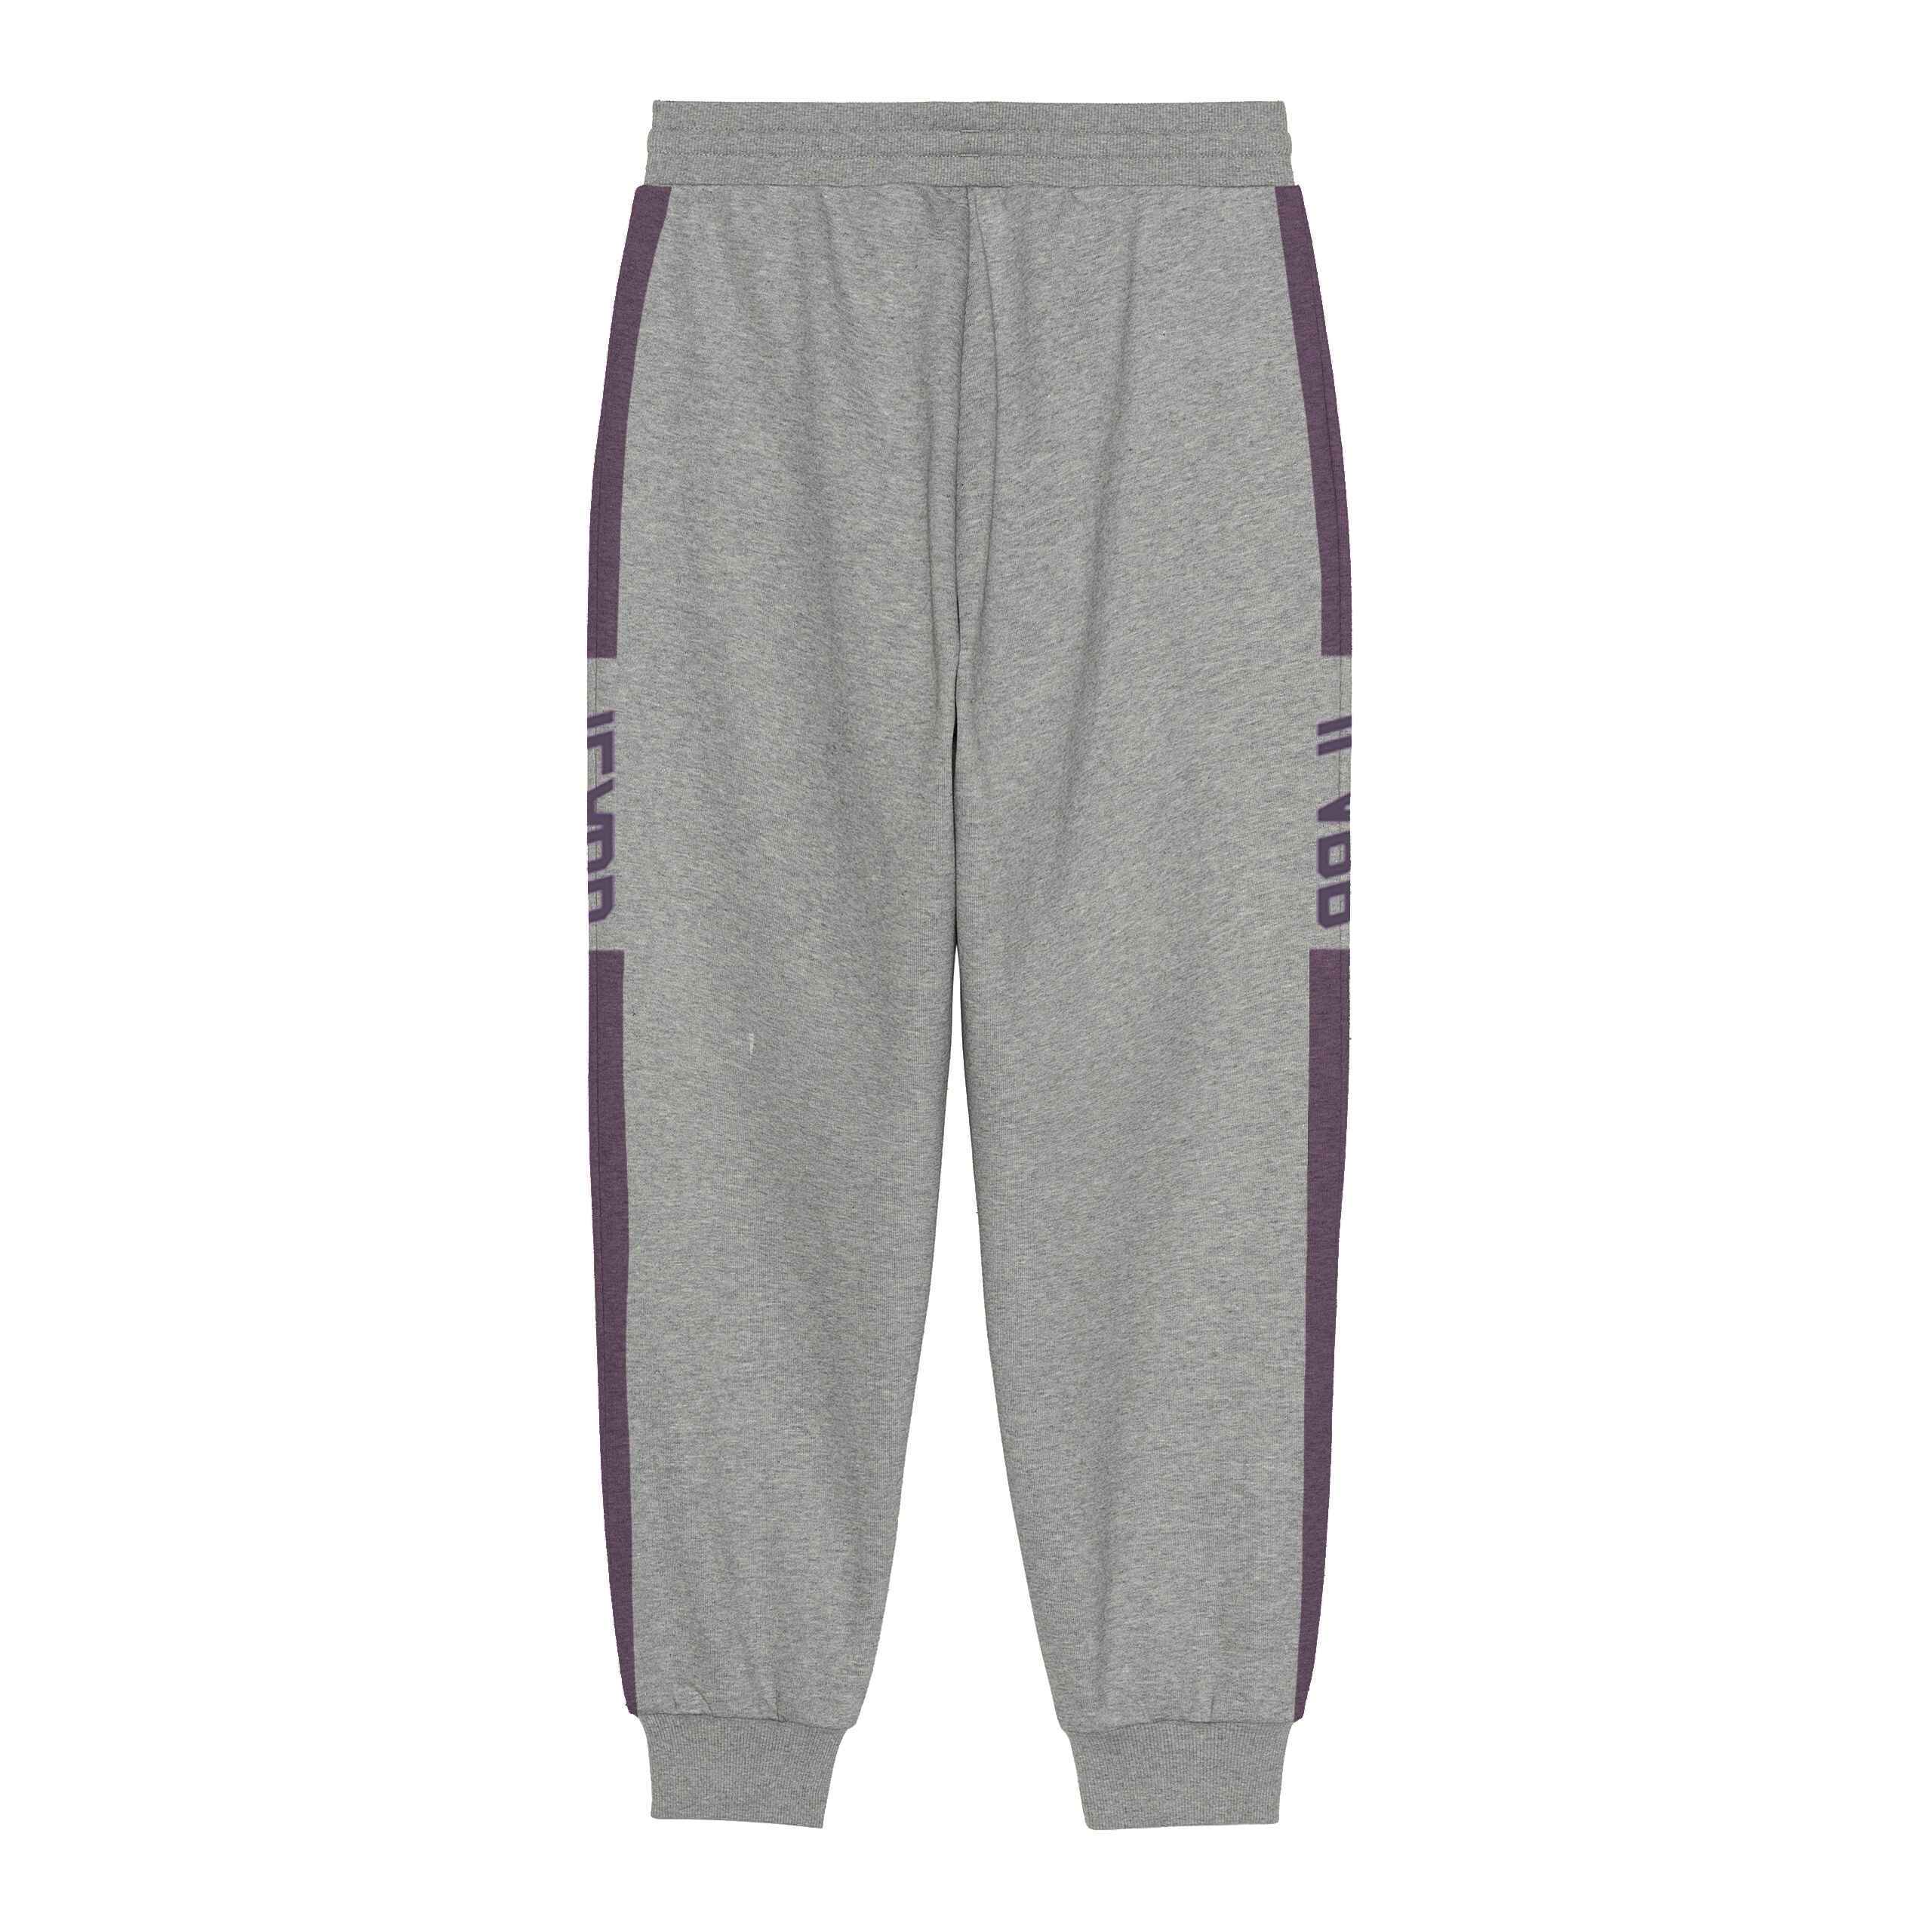 ILABB LADIES SPEED TRACKIE - GREY MARLE - Womens-Bottoms : Sequence ...